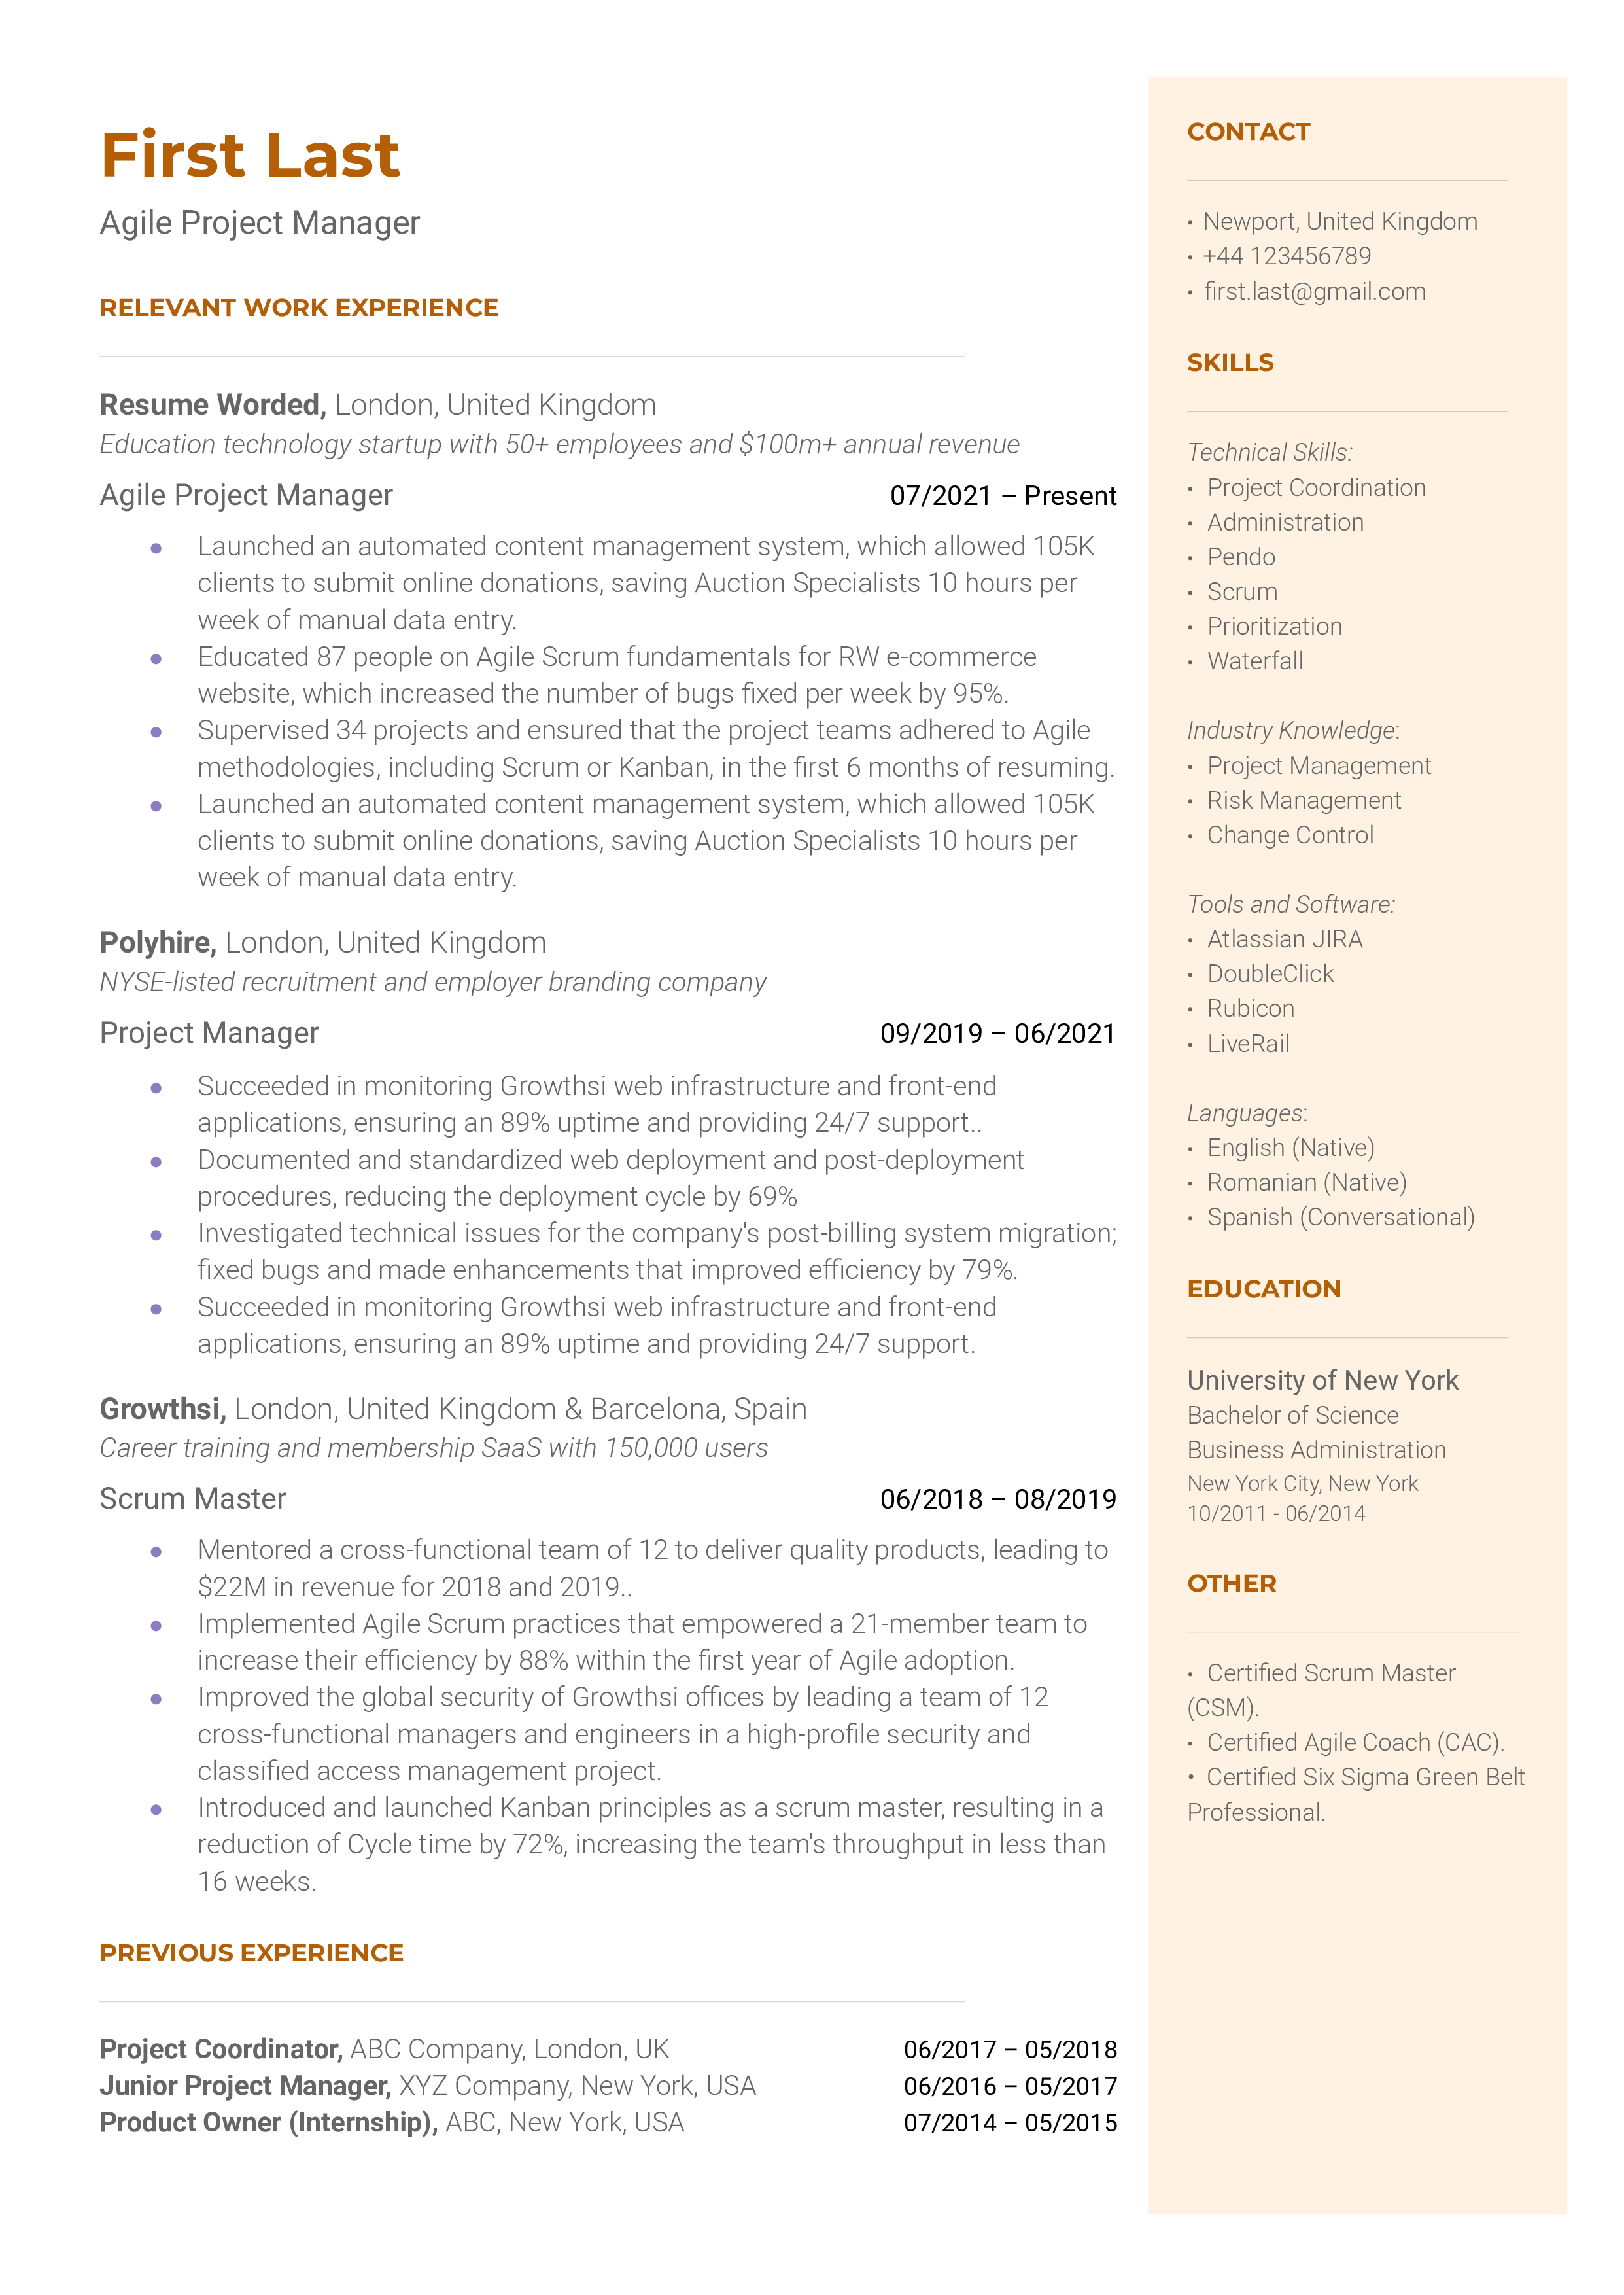 Agile Project Manager Resume Template + Example